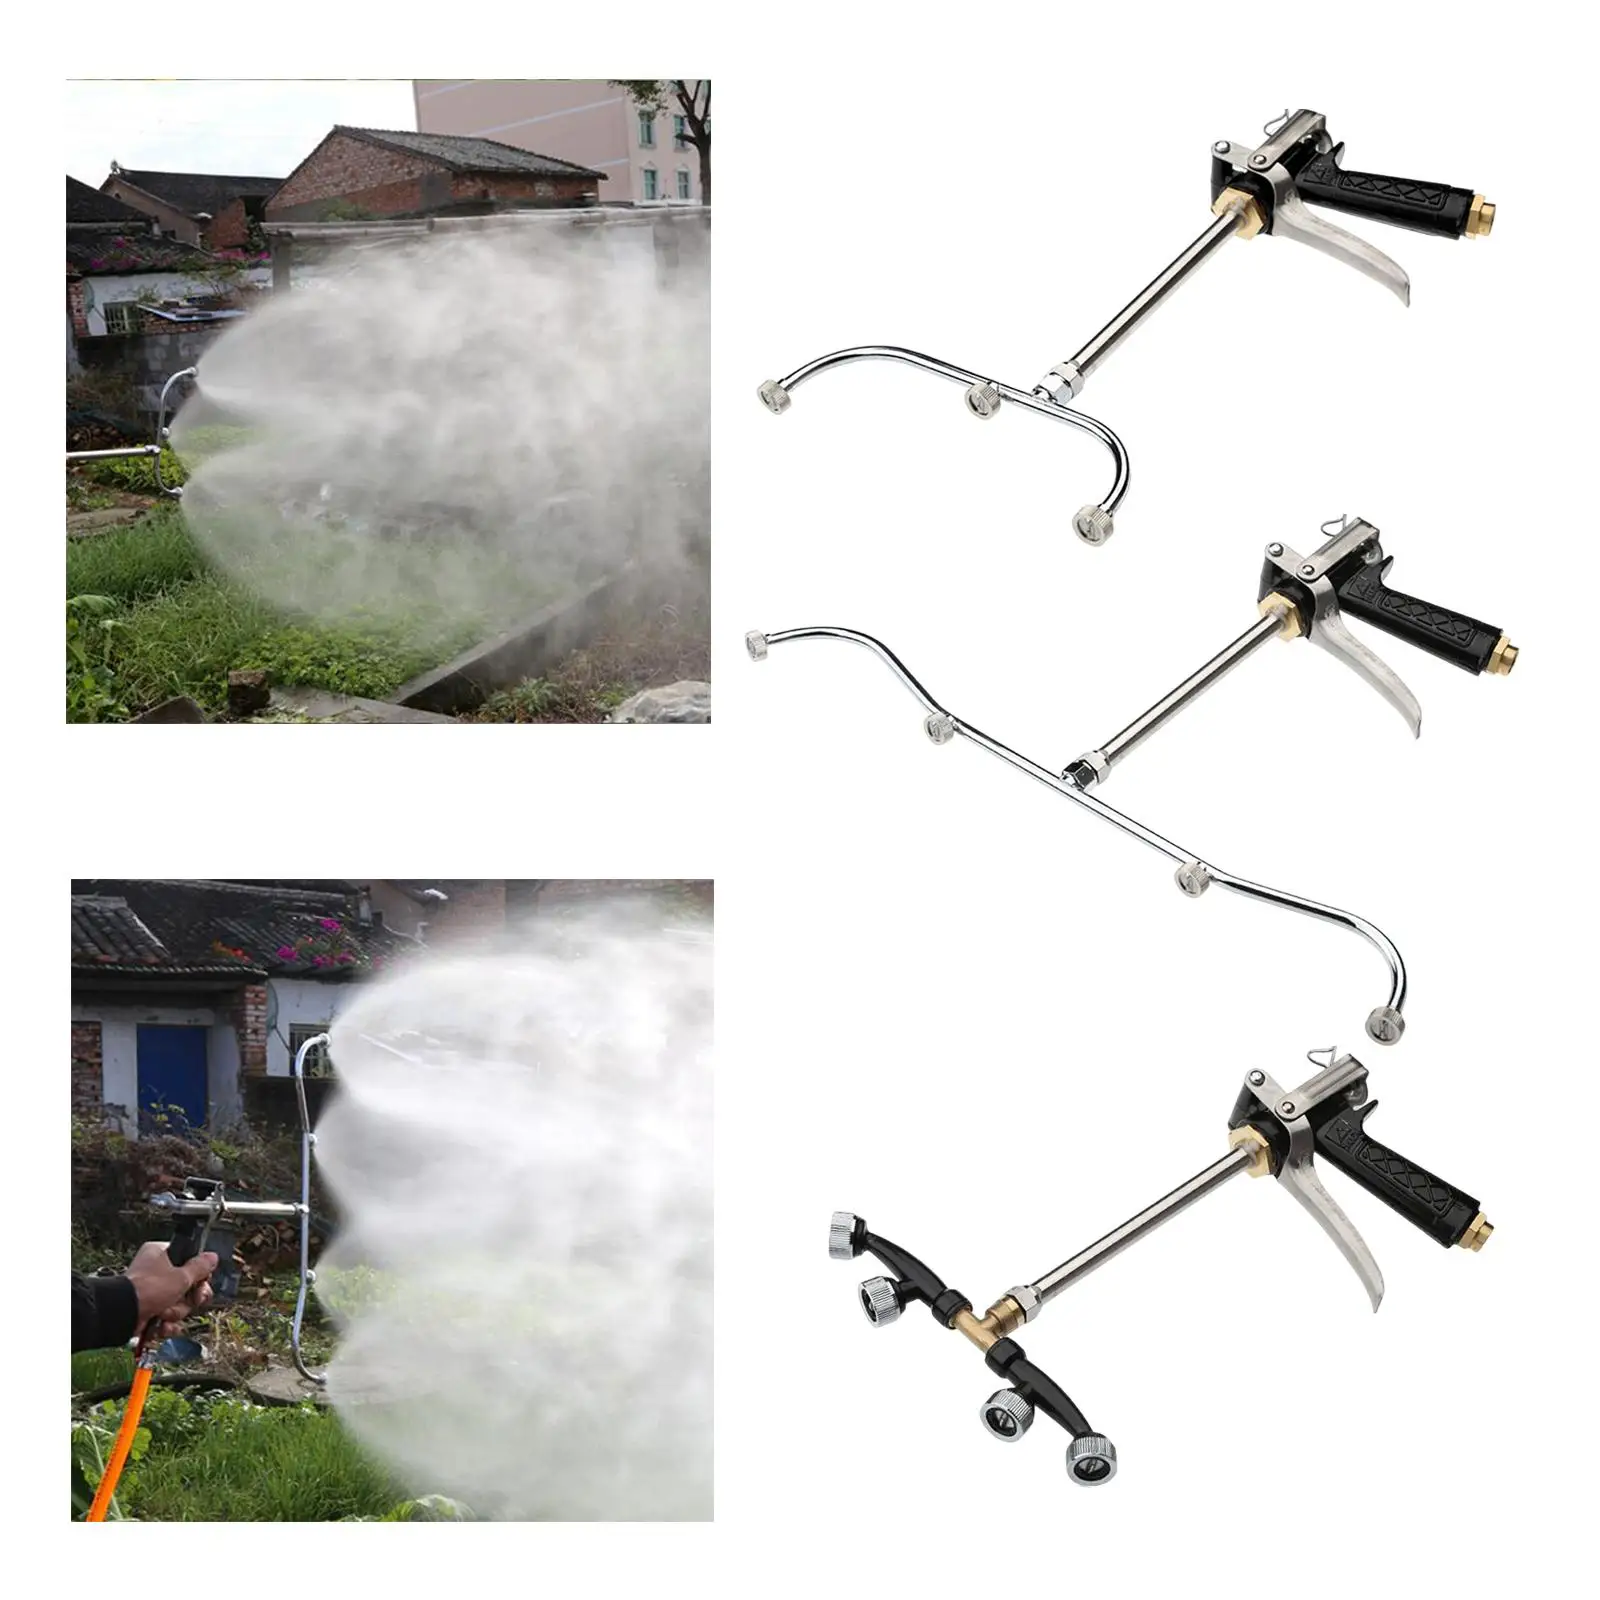 Nozzle Watering Spray High Pressure Agricultural Sprayer for Greenhouse Humidification Cooling